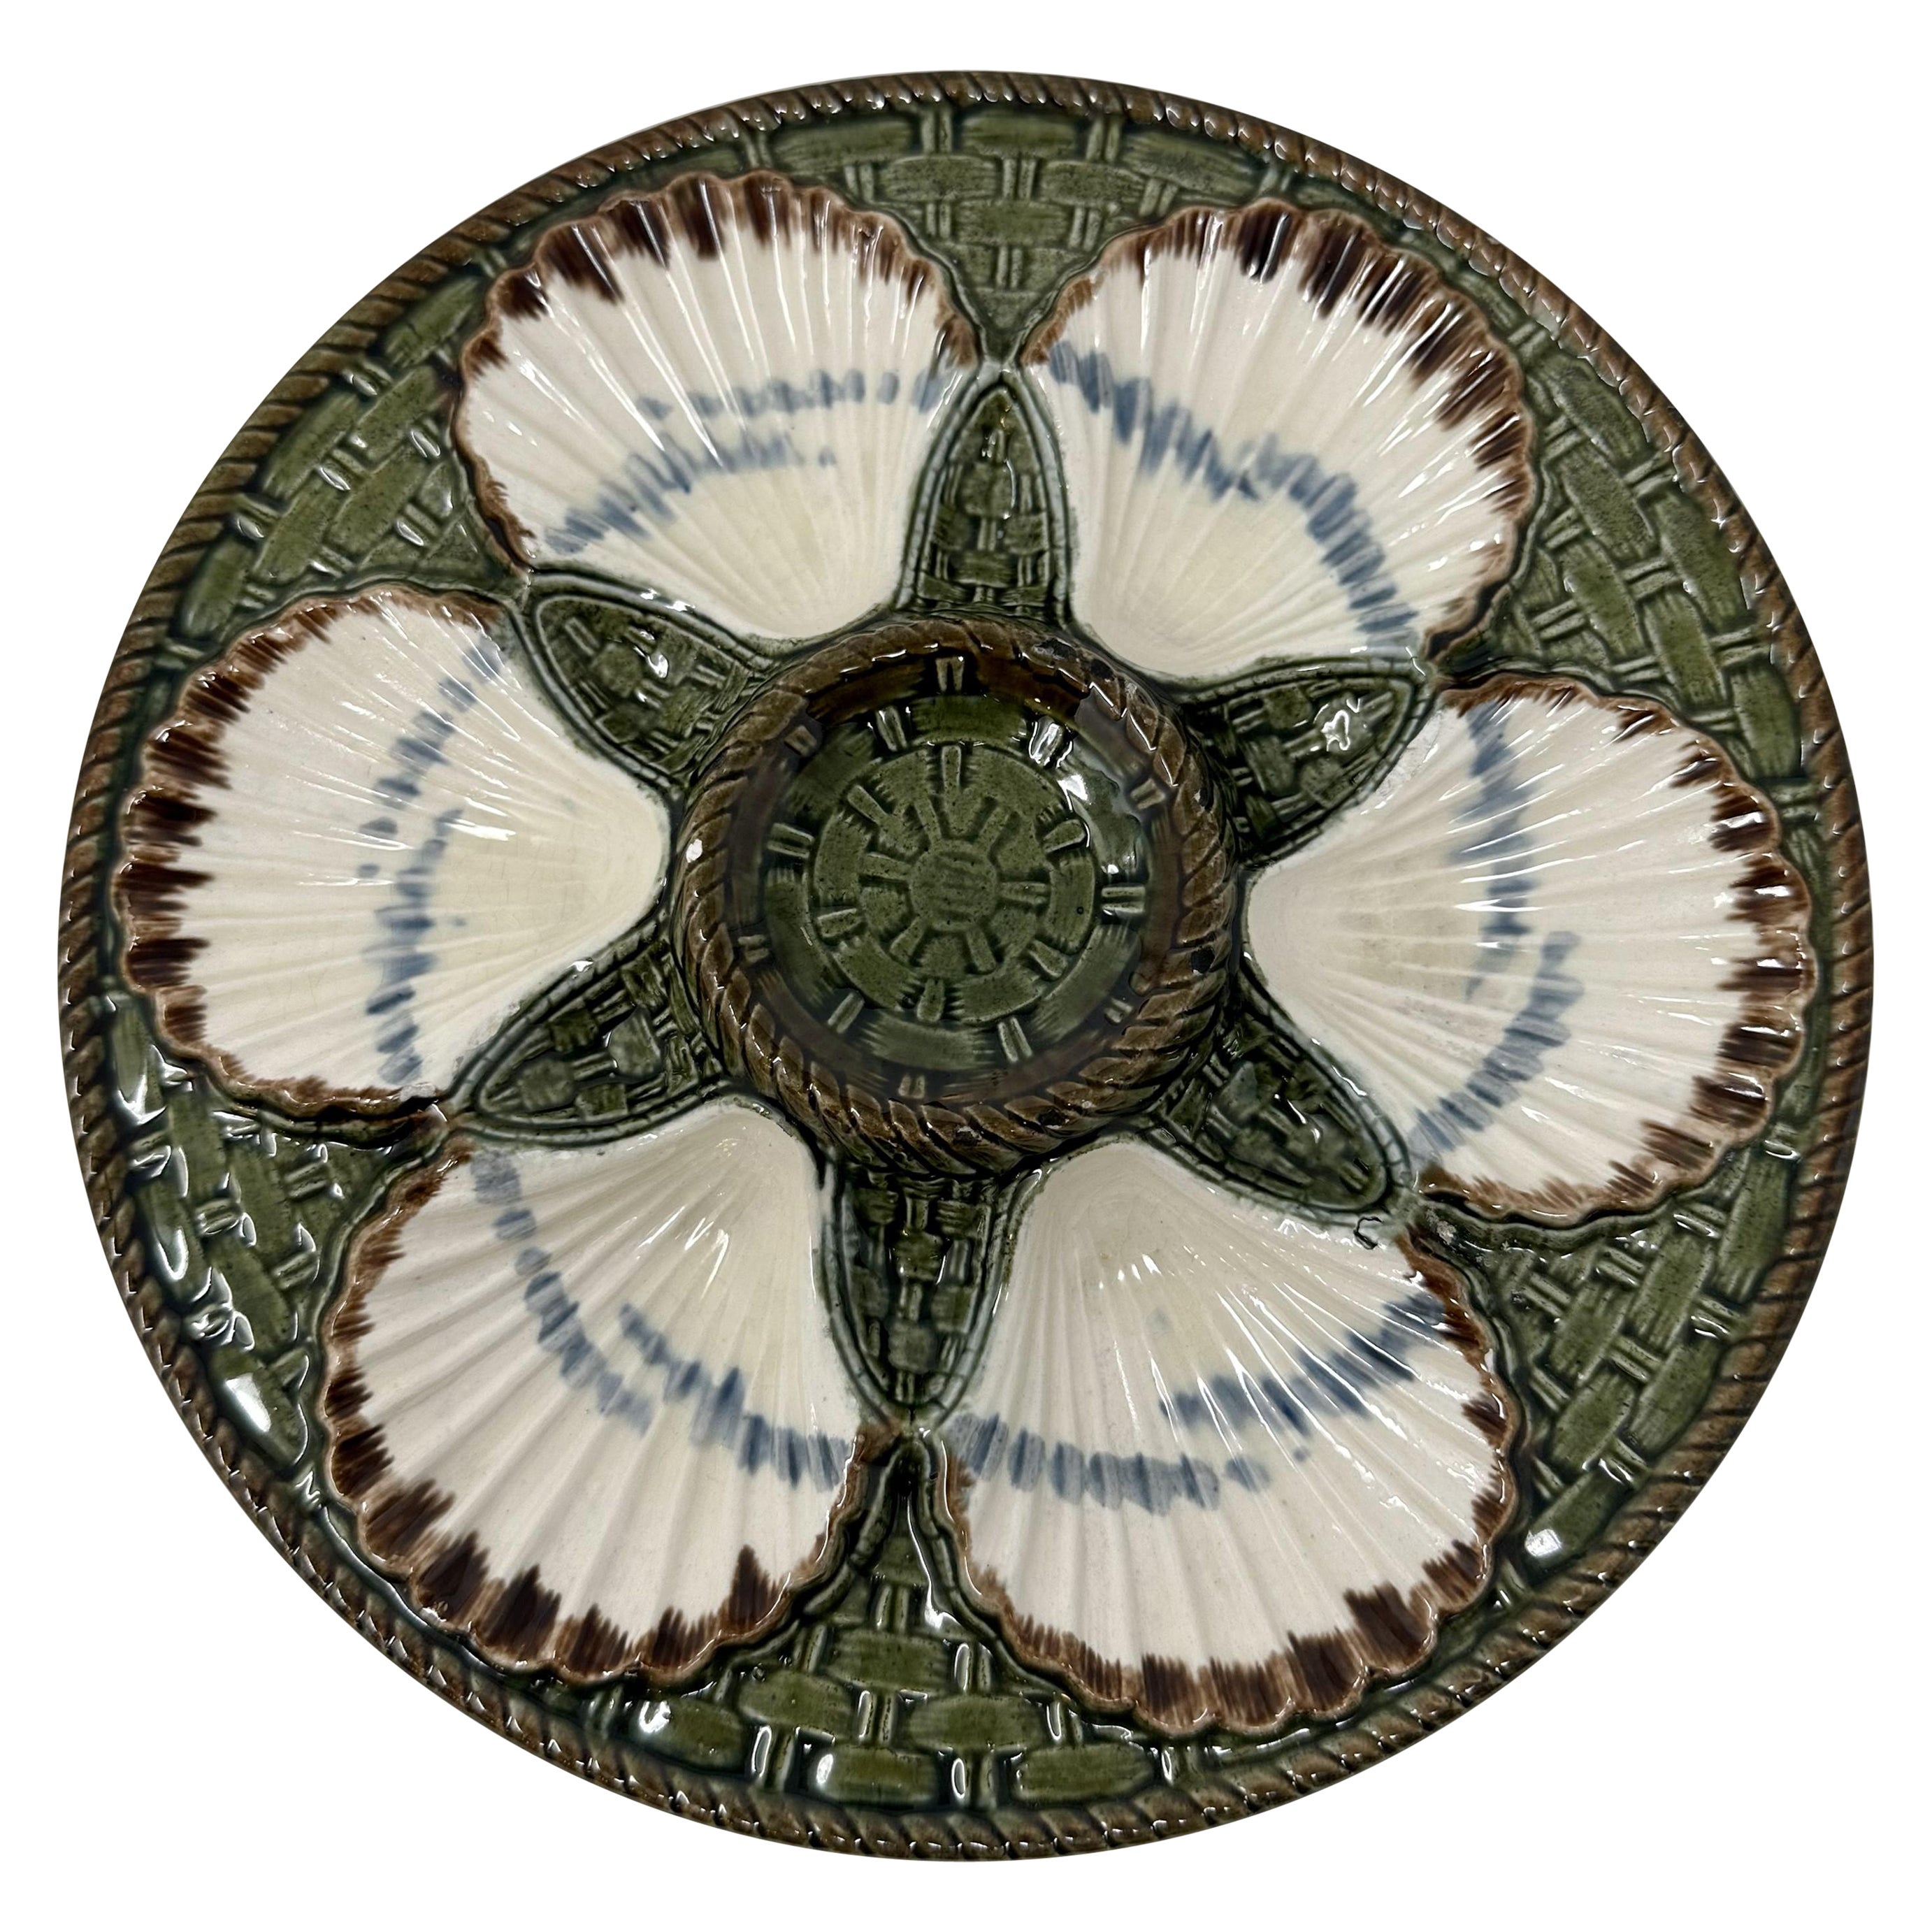 Estate French Faience Porcelain Oyster Plate Signed "Longchamp Co." Circa 1940.